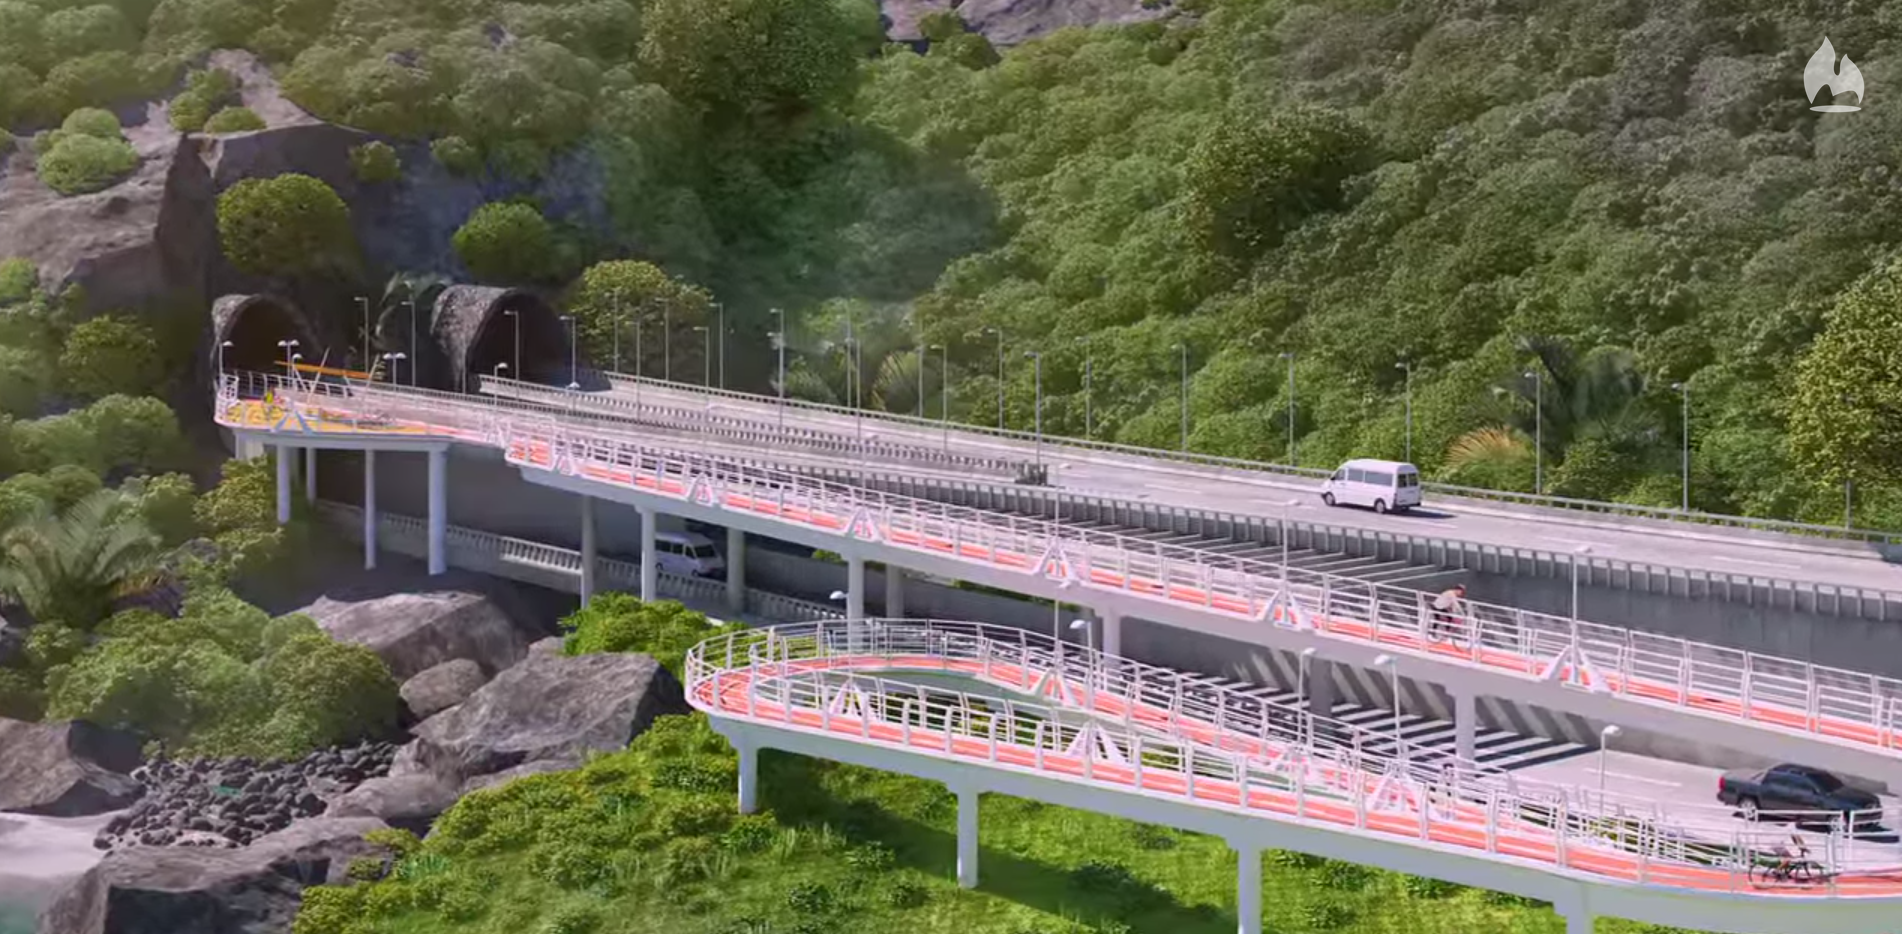 The extension of the Elevado do Joá will transform travel to Rio's western zones, image by City of Rio/Disclosure